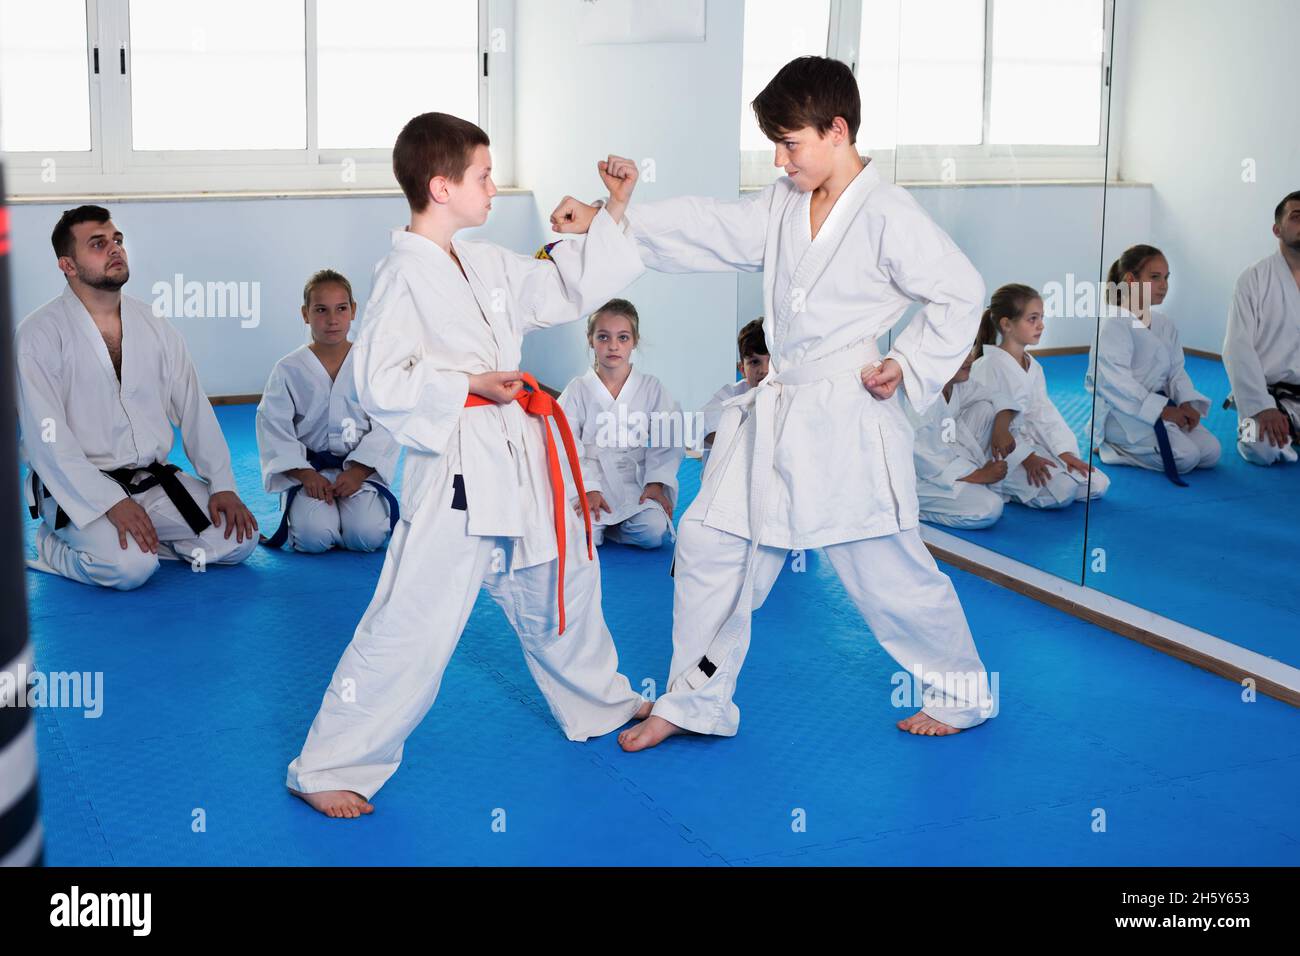 Pair of boys fighting in sparring to use new moves Stock Photo - Alamy